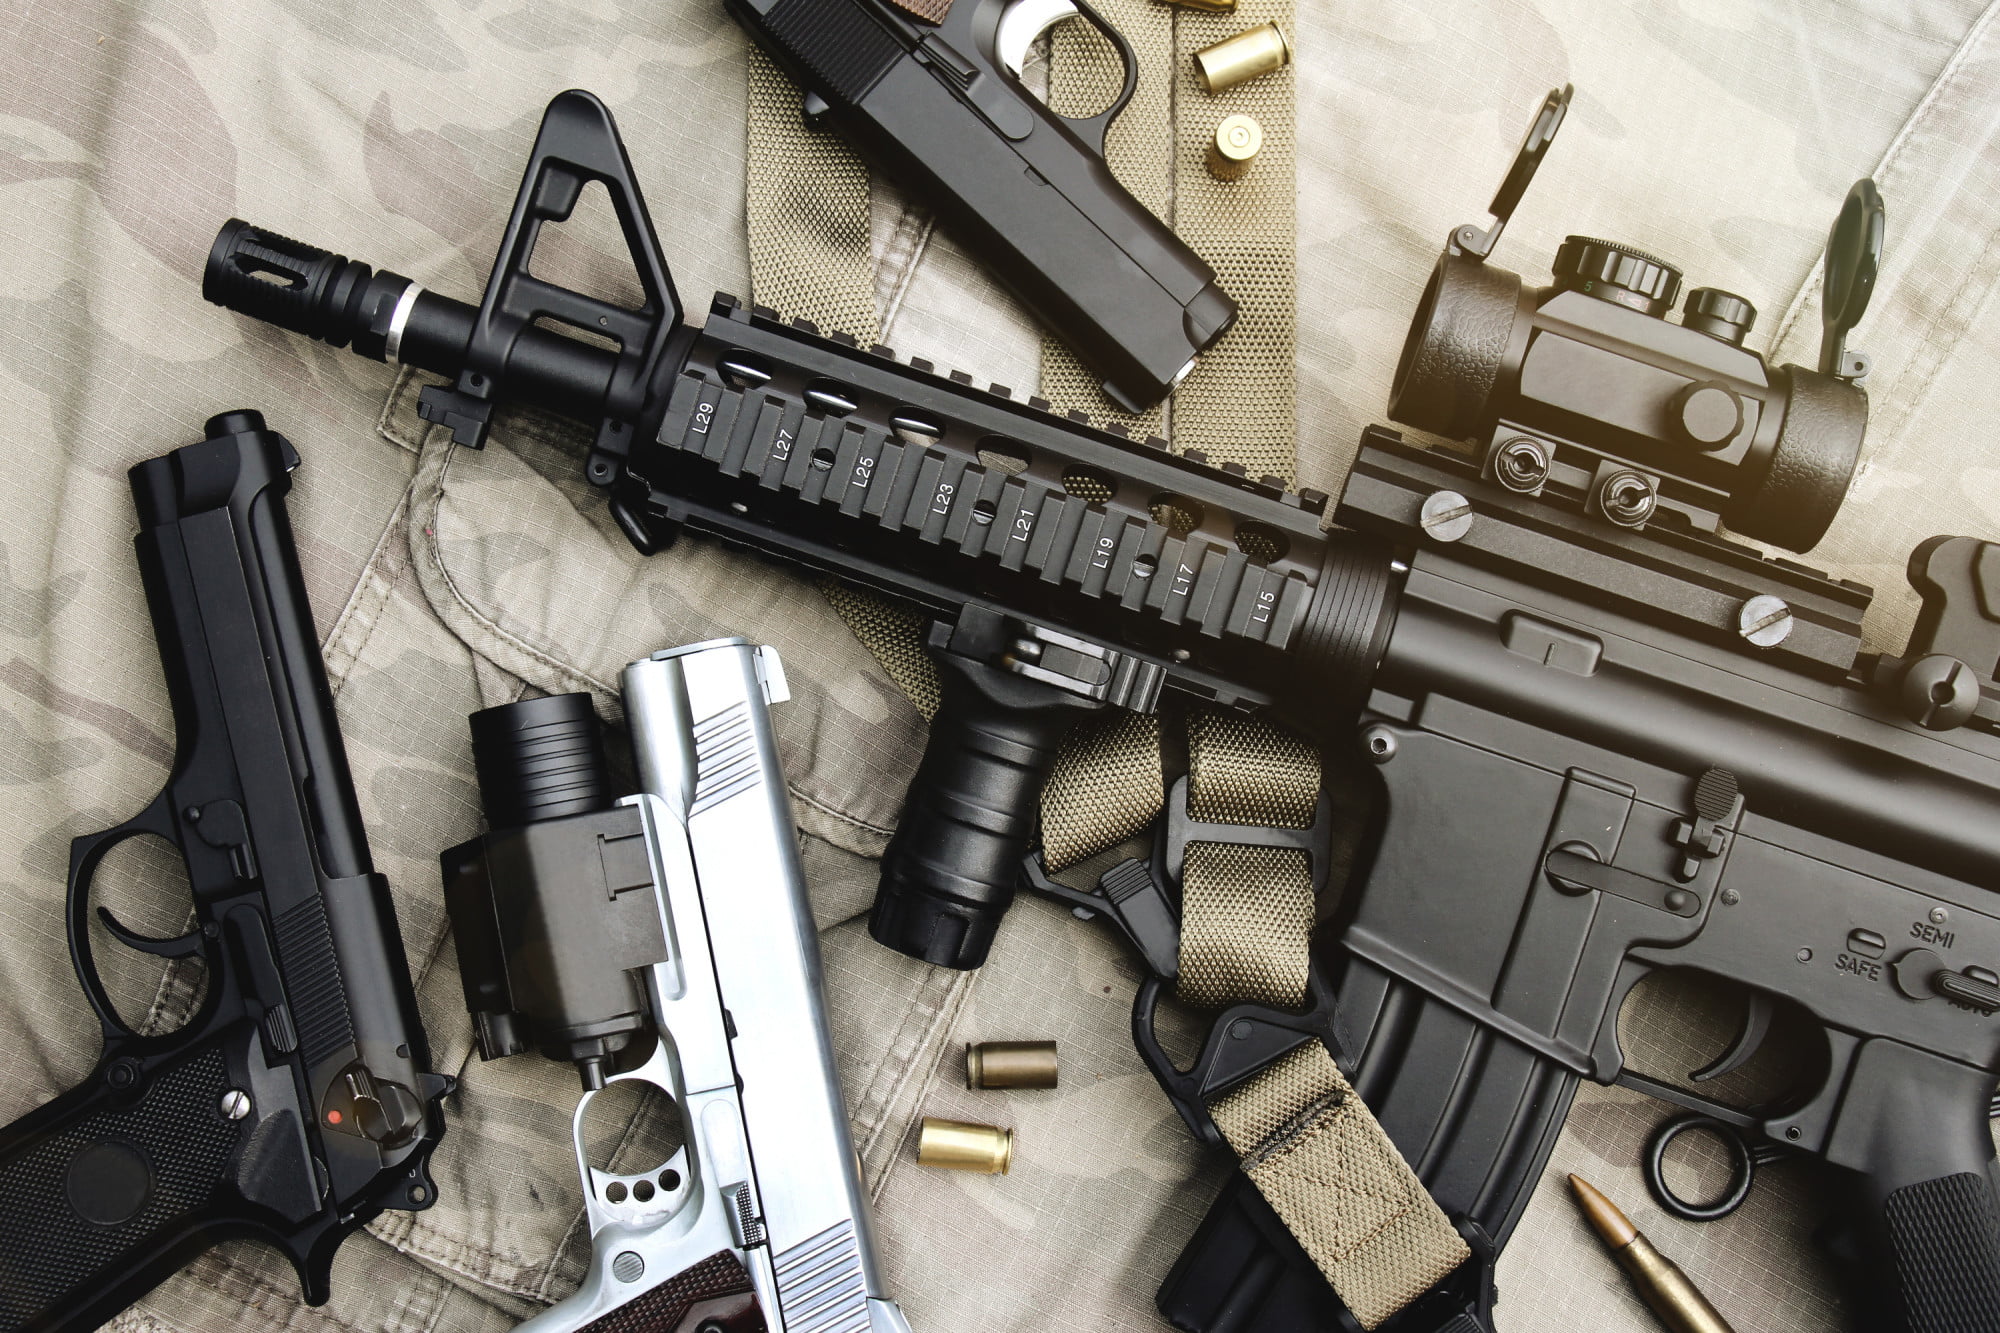 Are you wondering if an AR-15 is the right gun for you? Click here for five things you should know and consider before buying an AR-15 gun.